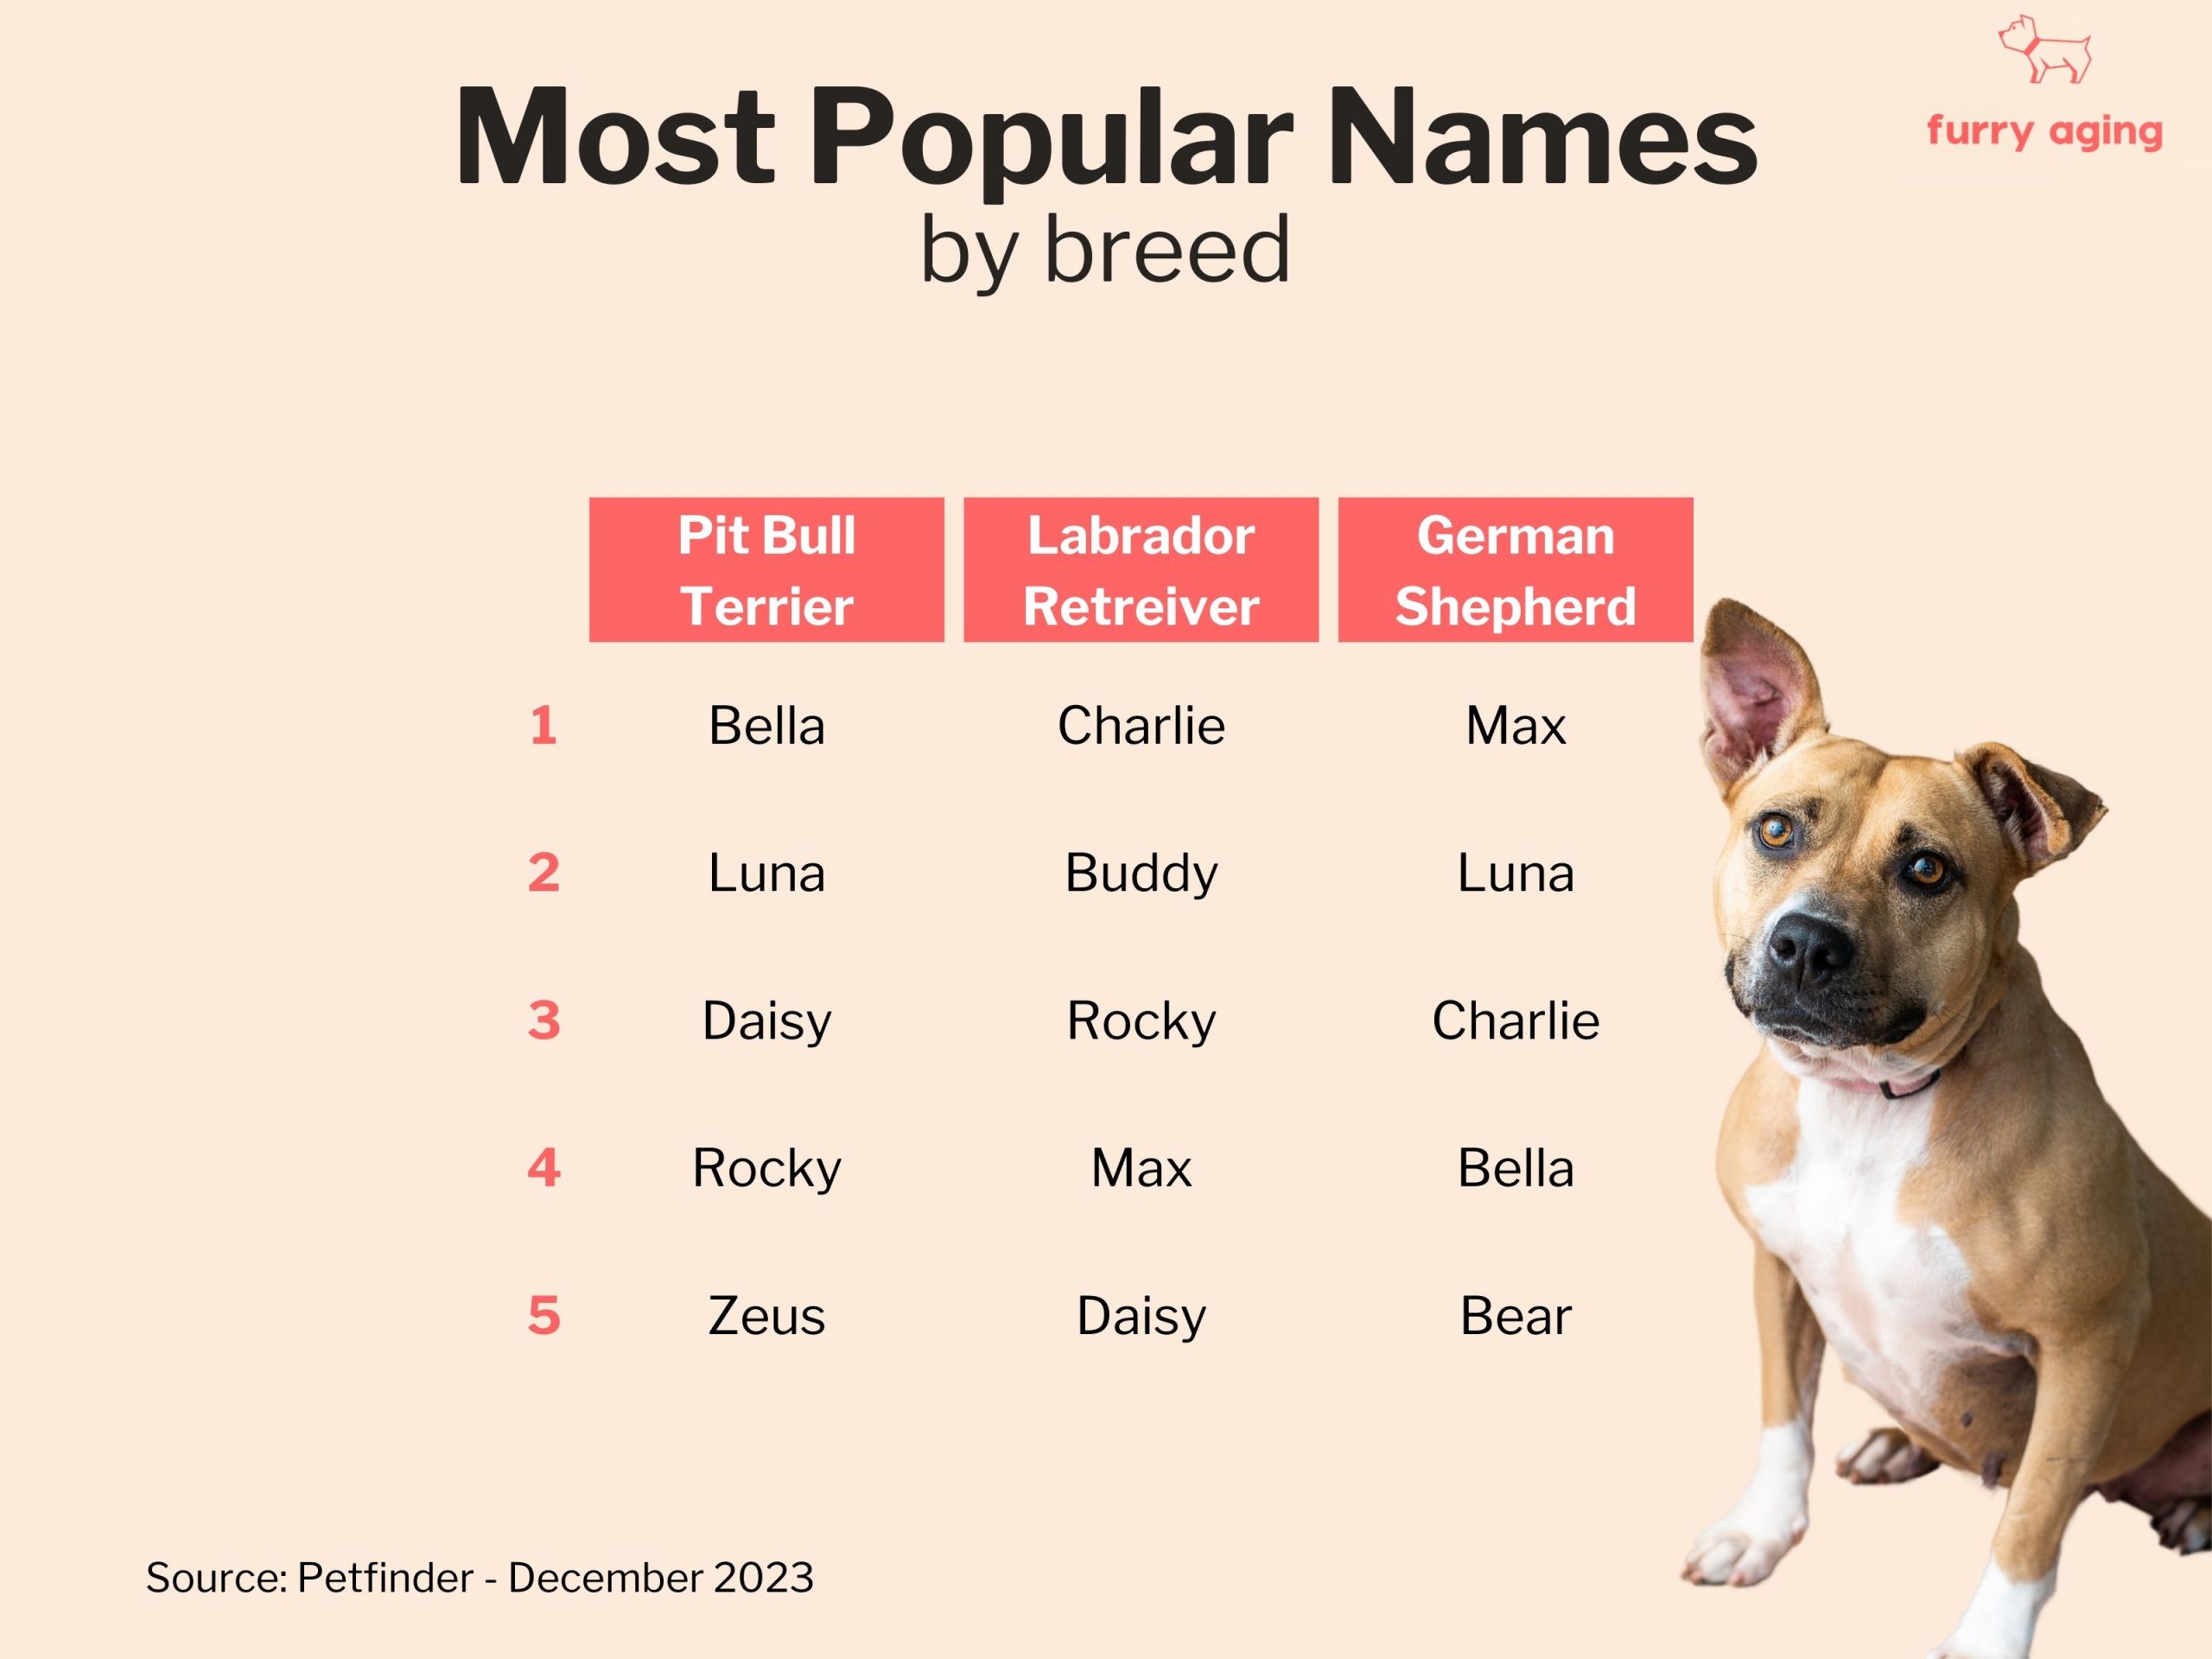 Most popular names by breed